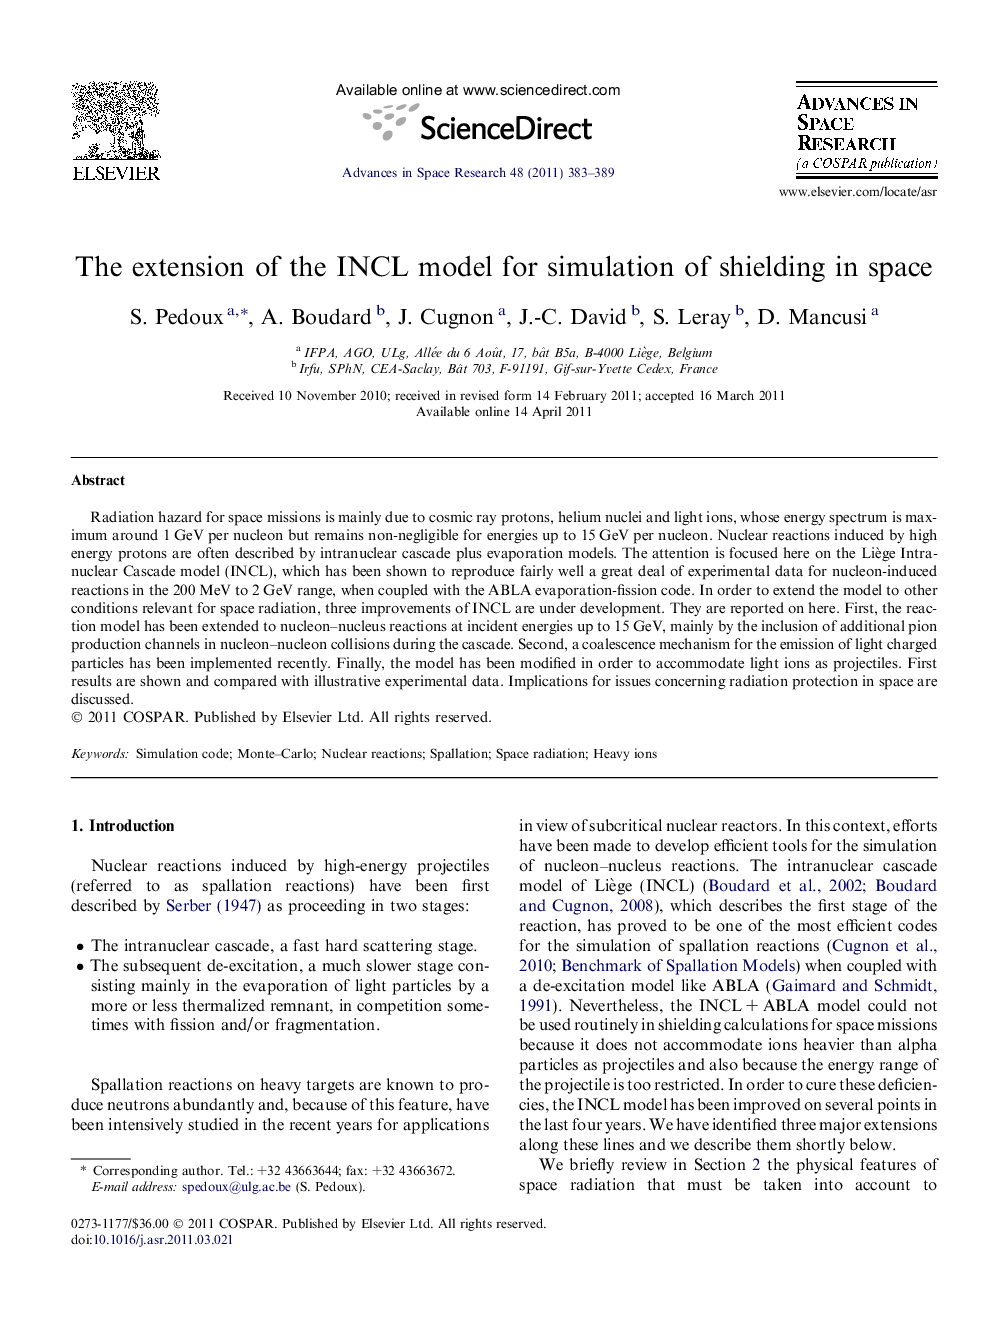 The extension of the INCL model for simulation of shielding in space